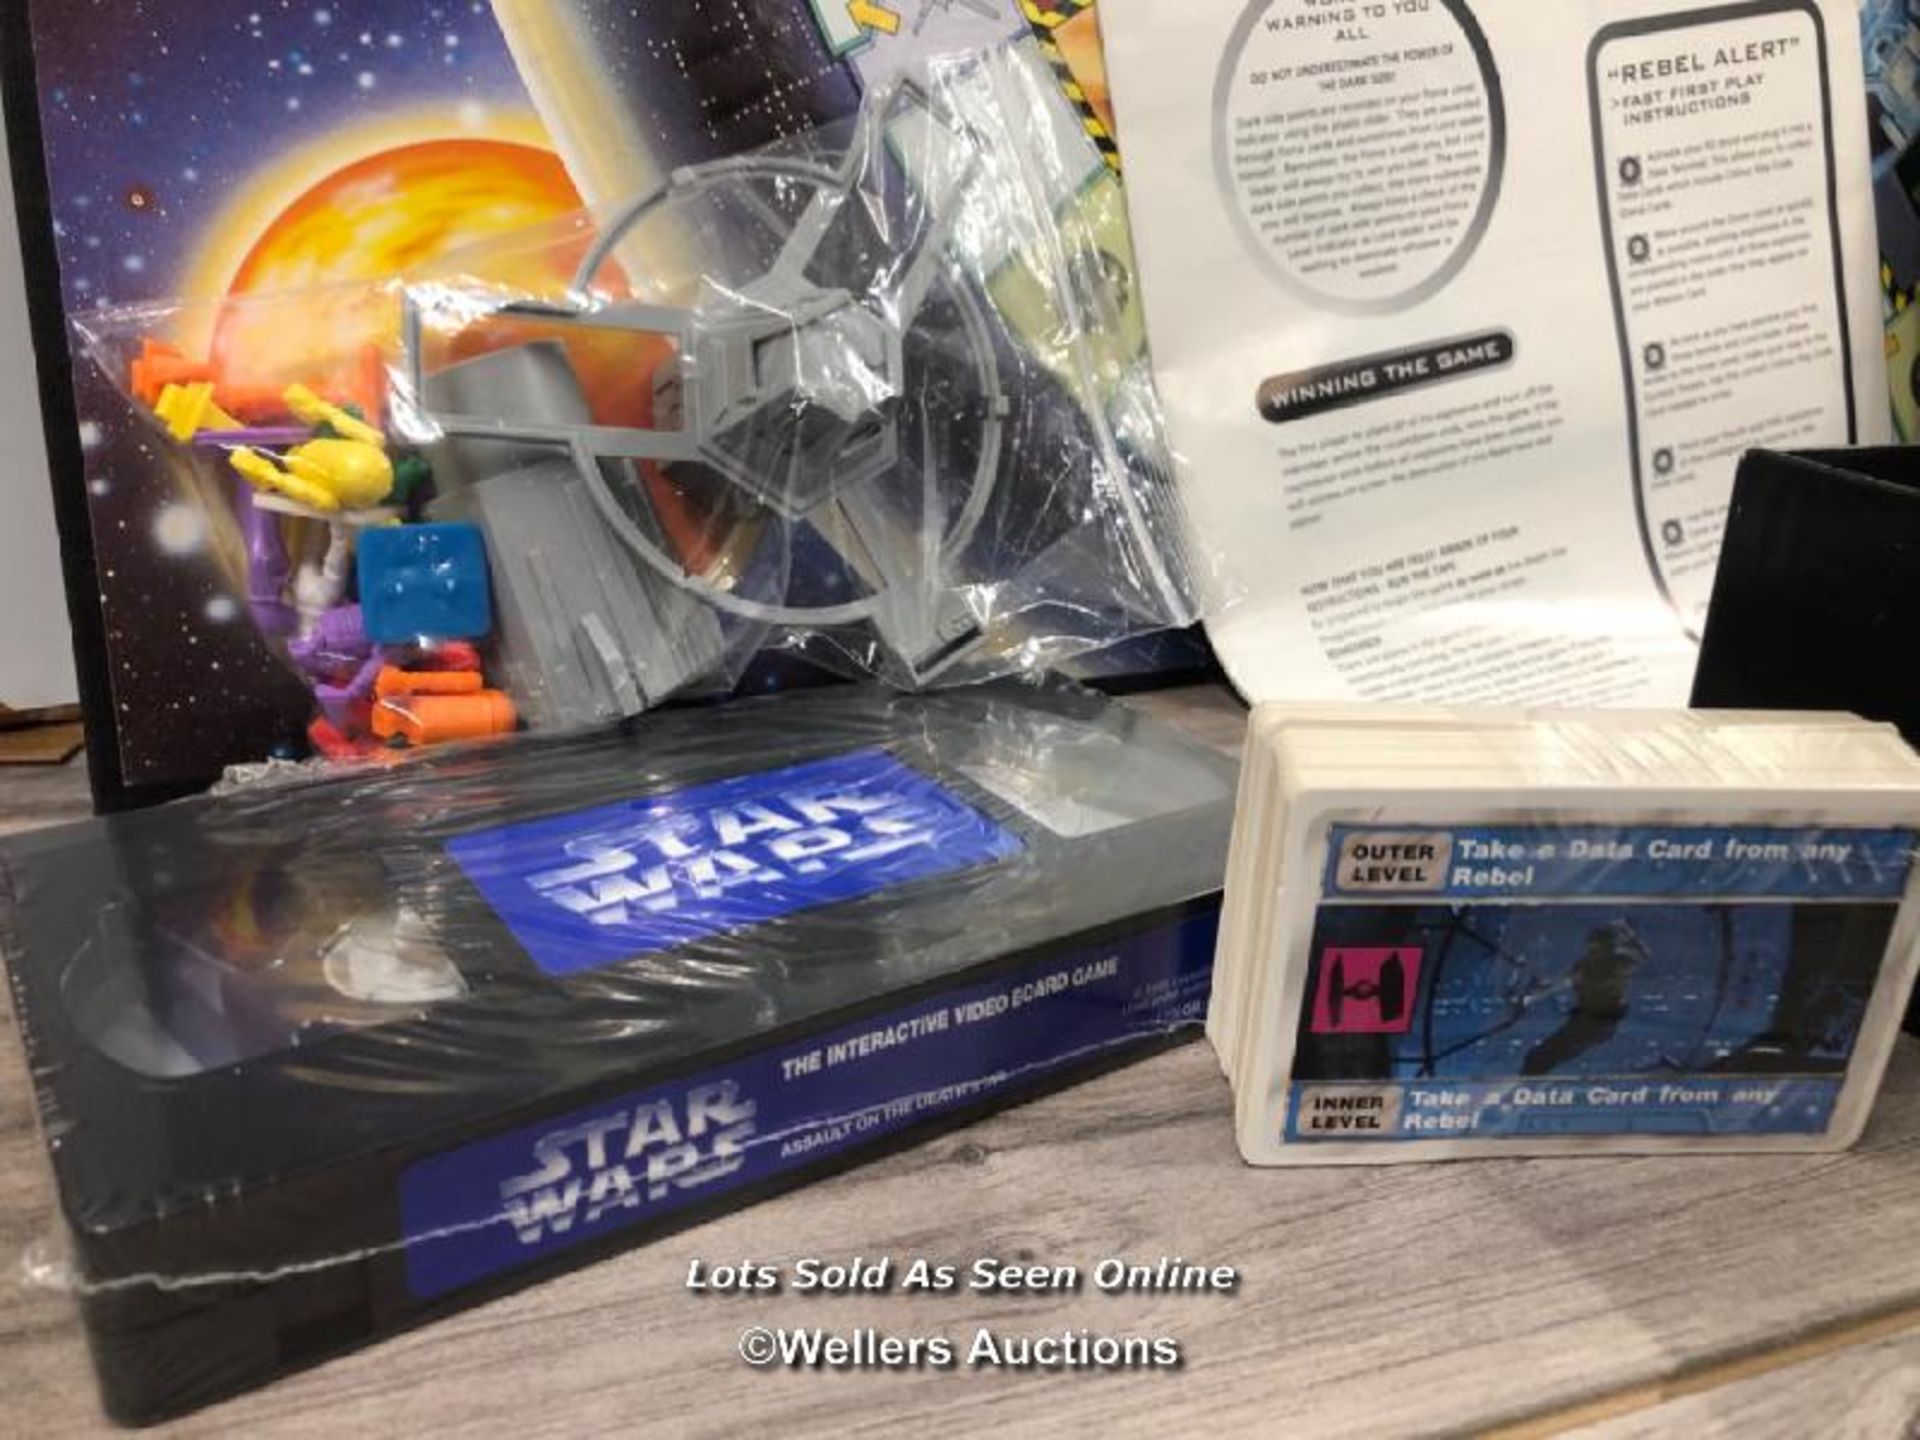 STAR WARS - 1990'S VHS BOARD GAME - Image 4 of 4